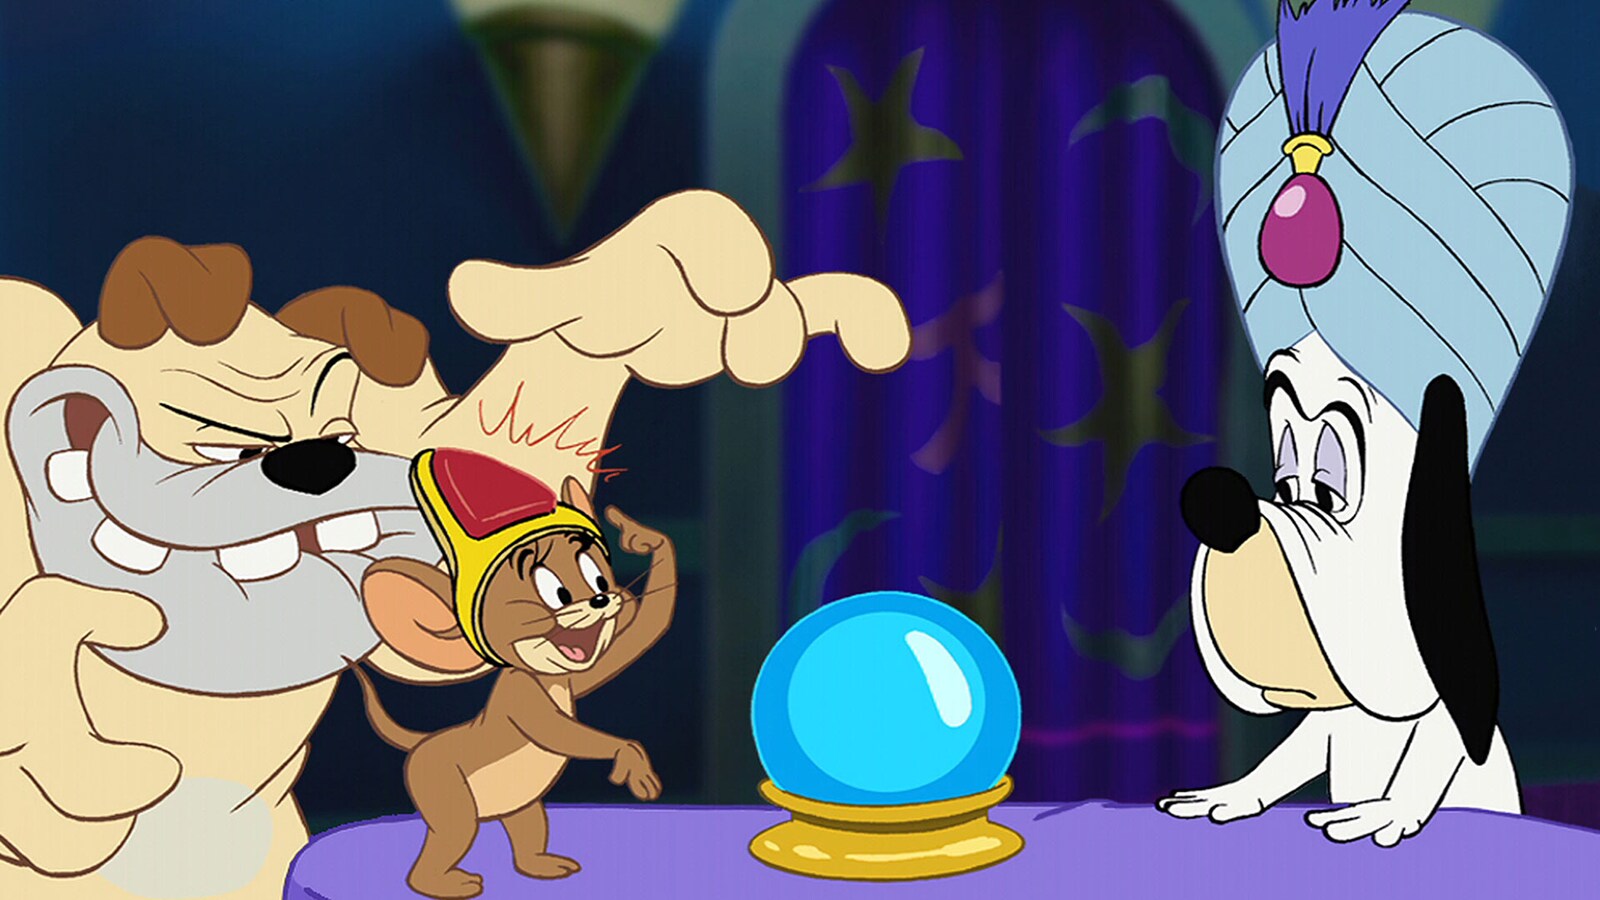 tom-and-jerry-the-magic-ring-2002